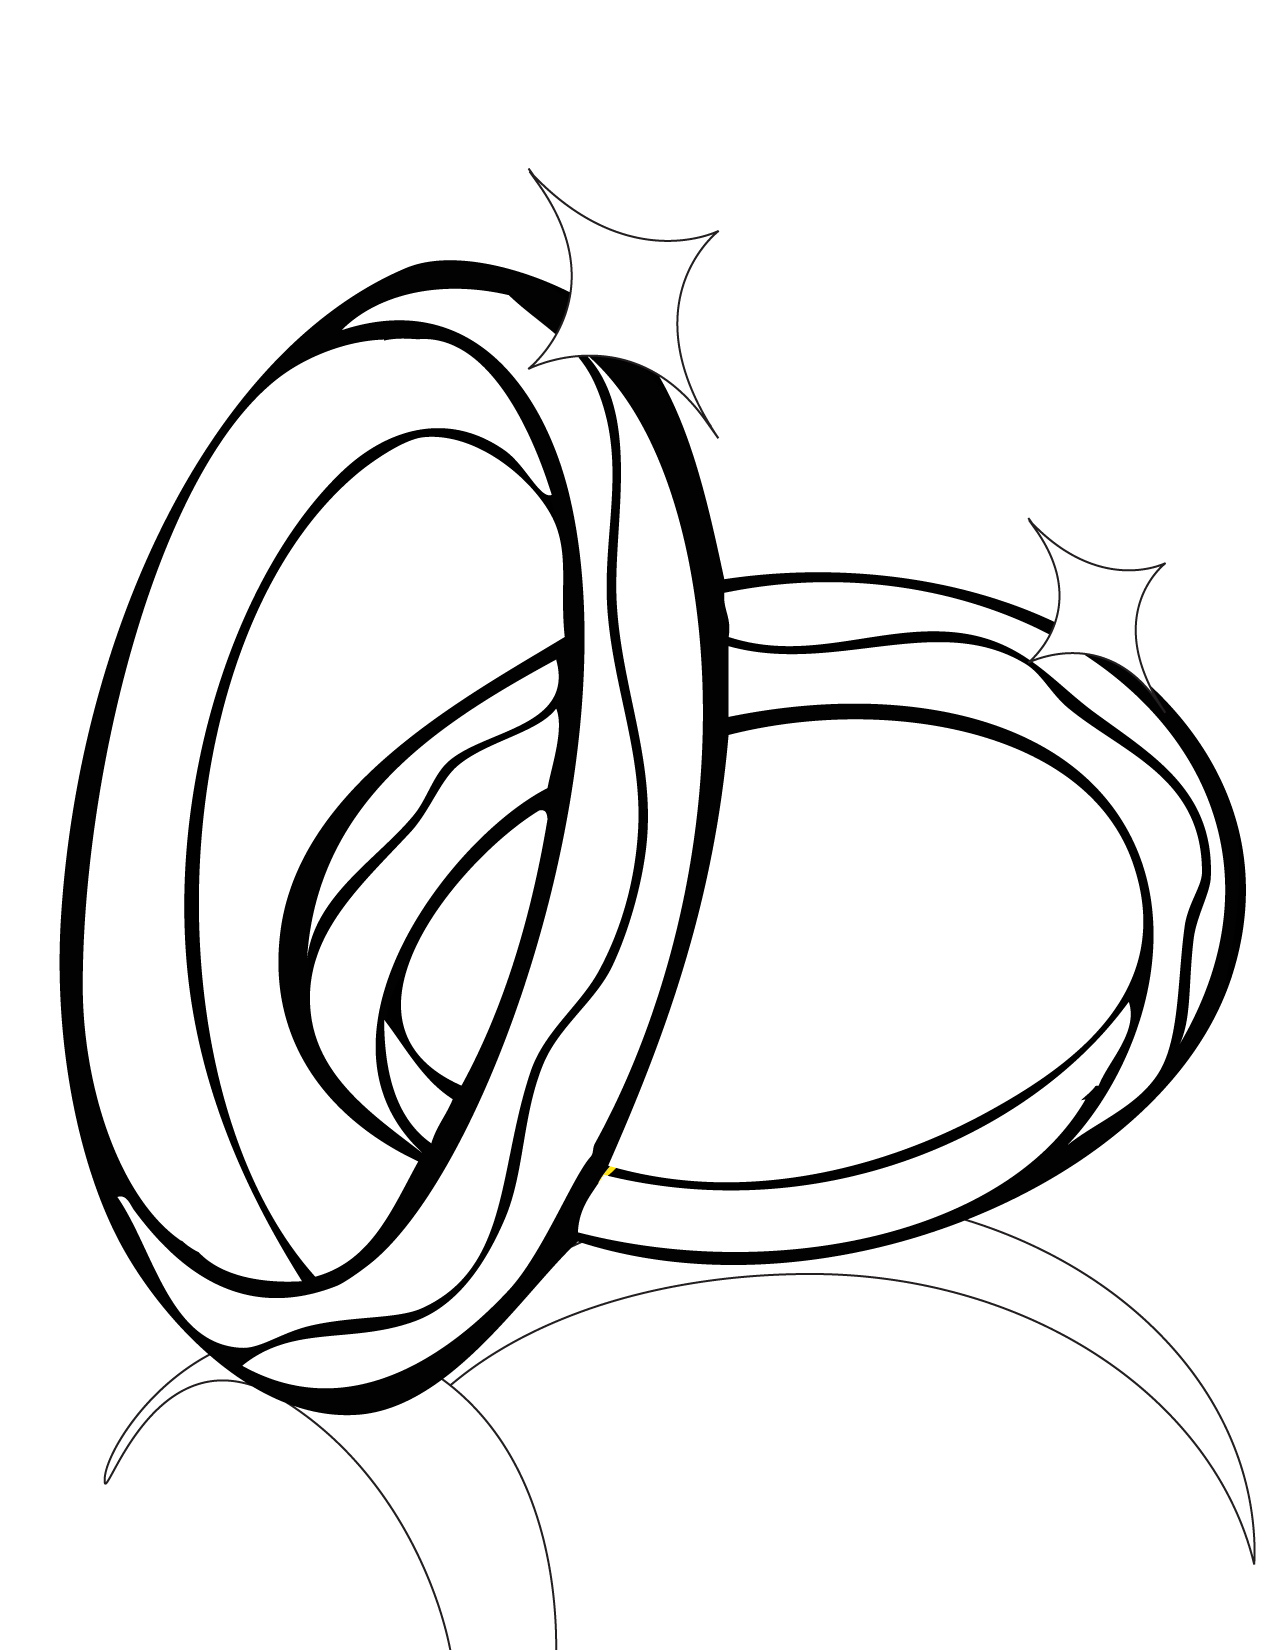 Wedding Rings Coloring Page   Handipoints